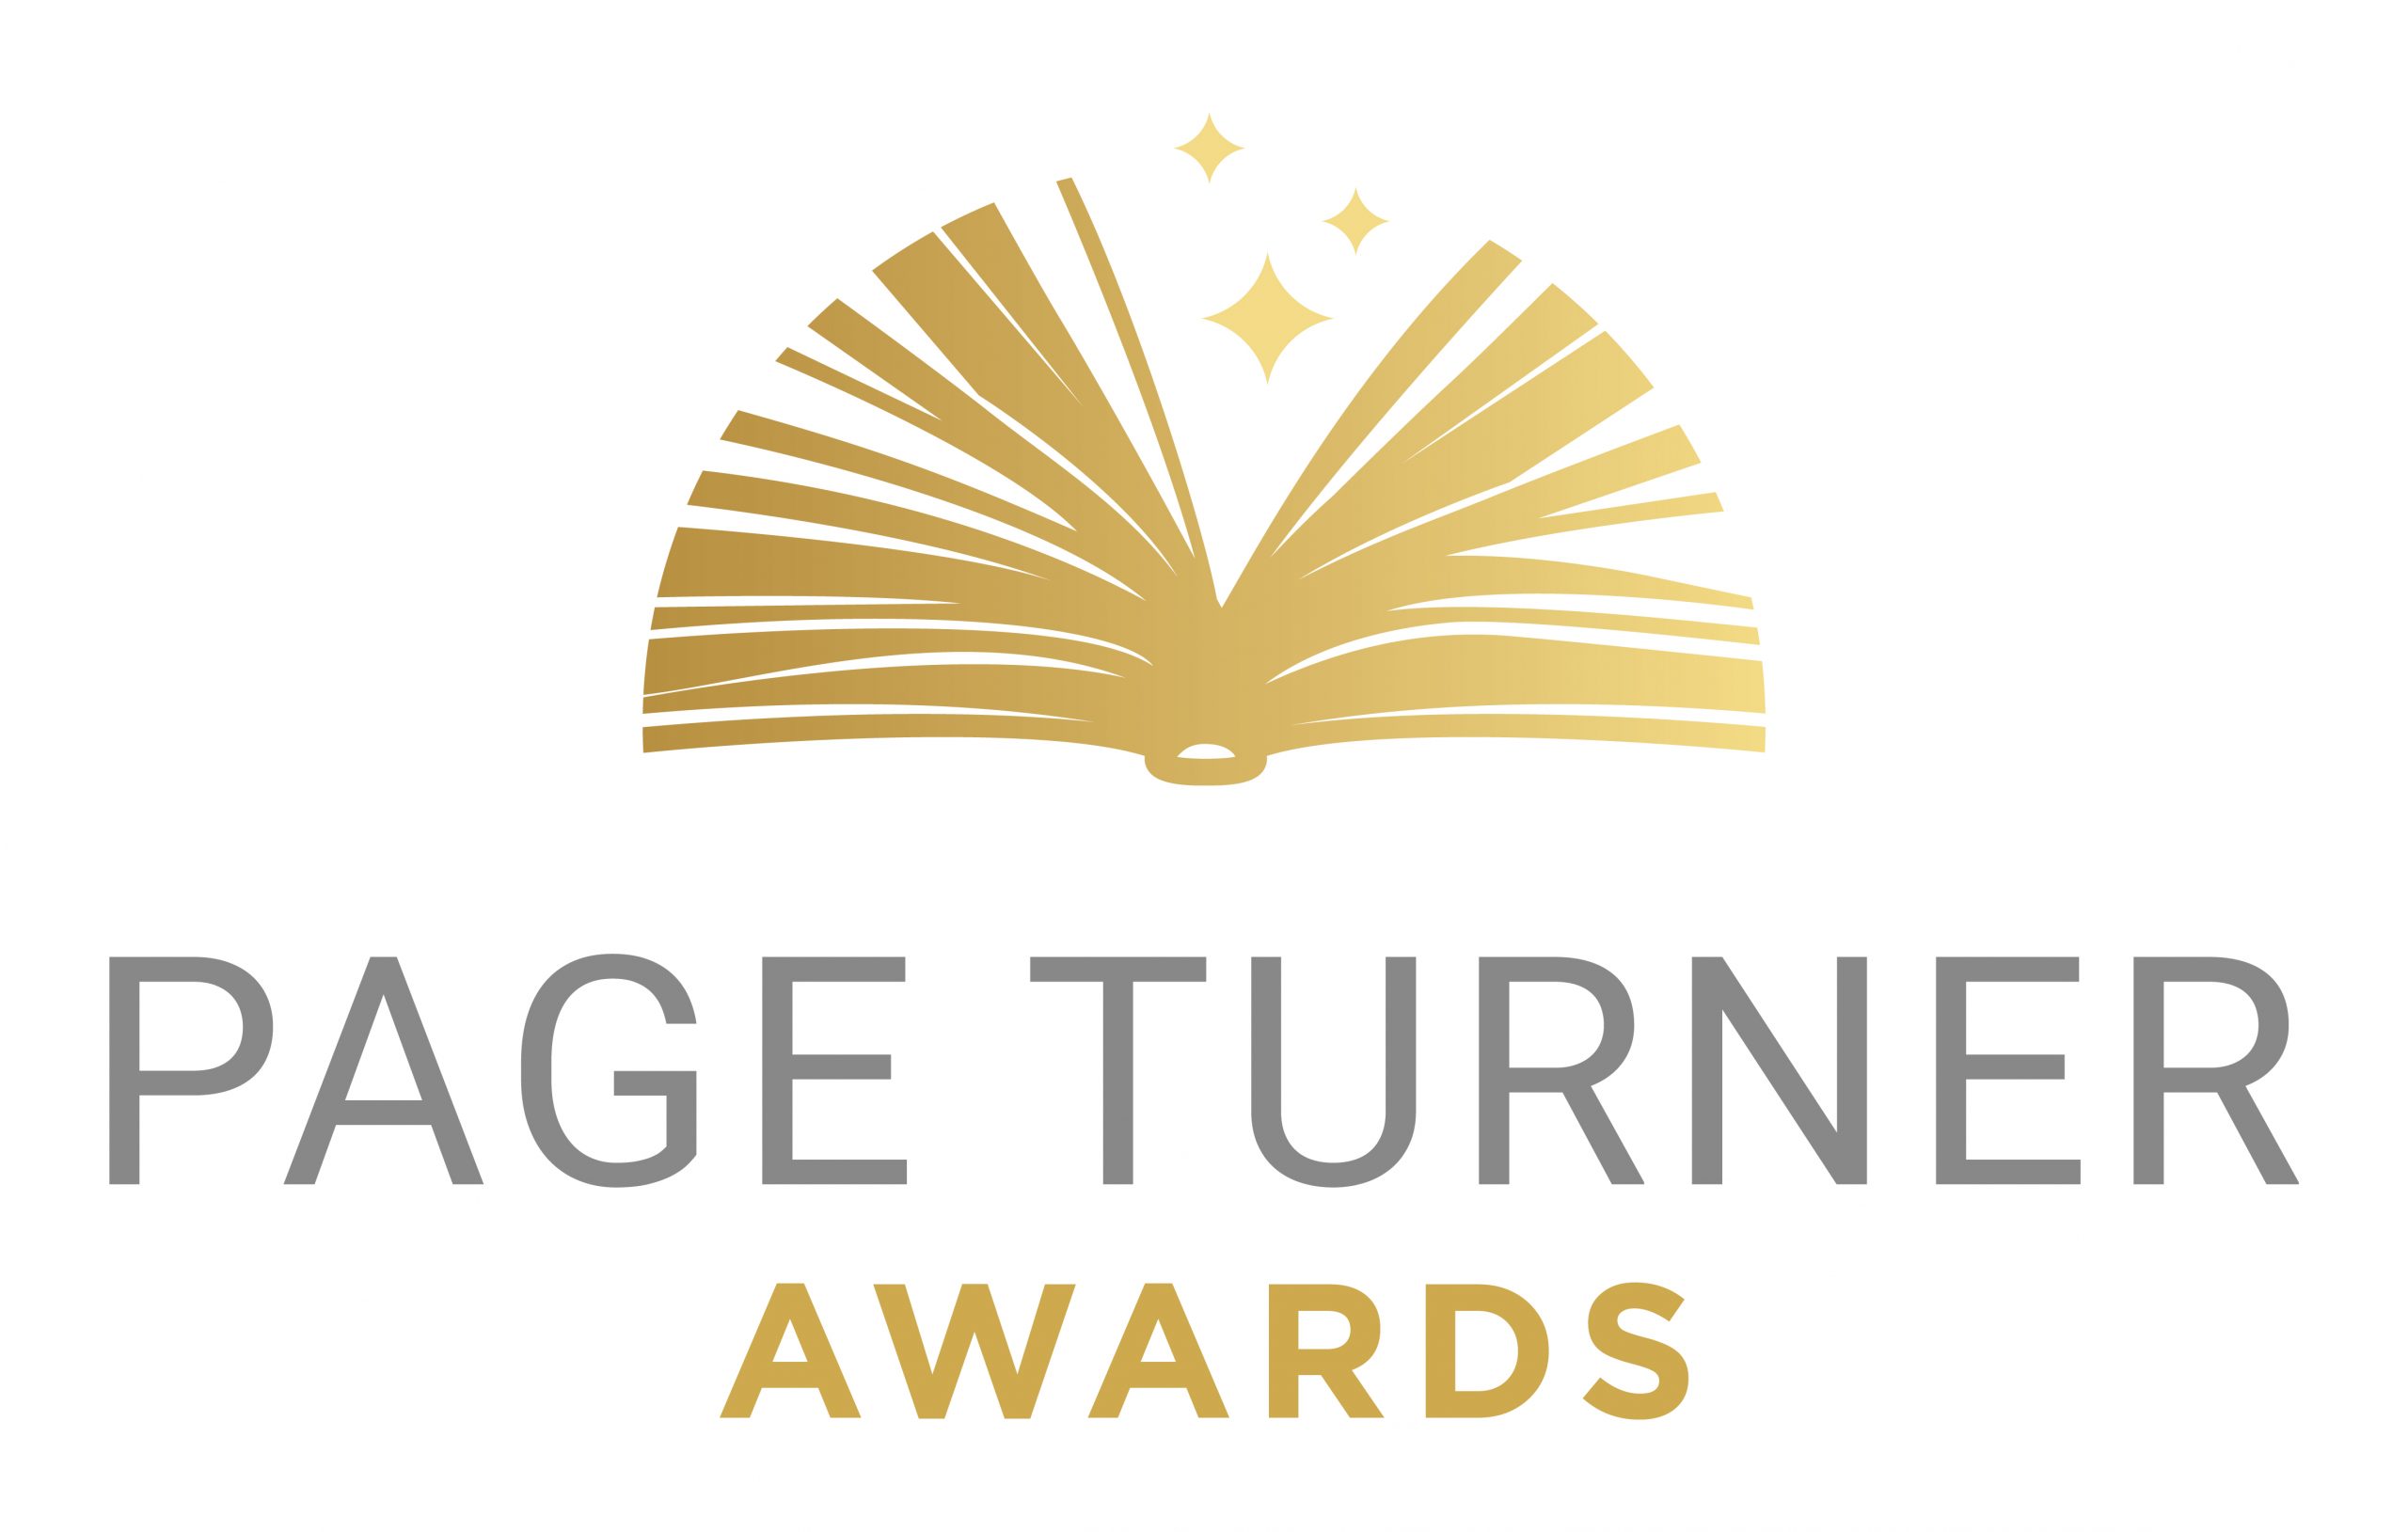 Page Turner Awards Logo Portrait Gold and Stars